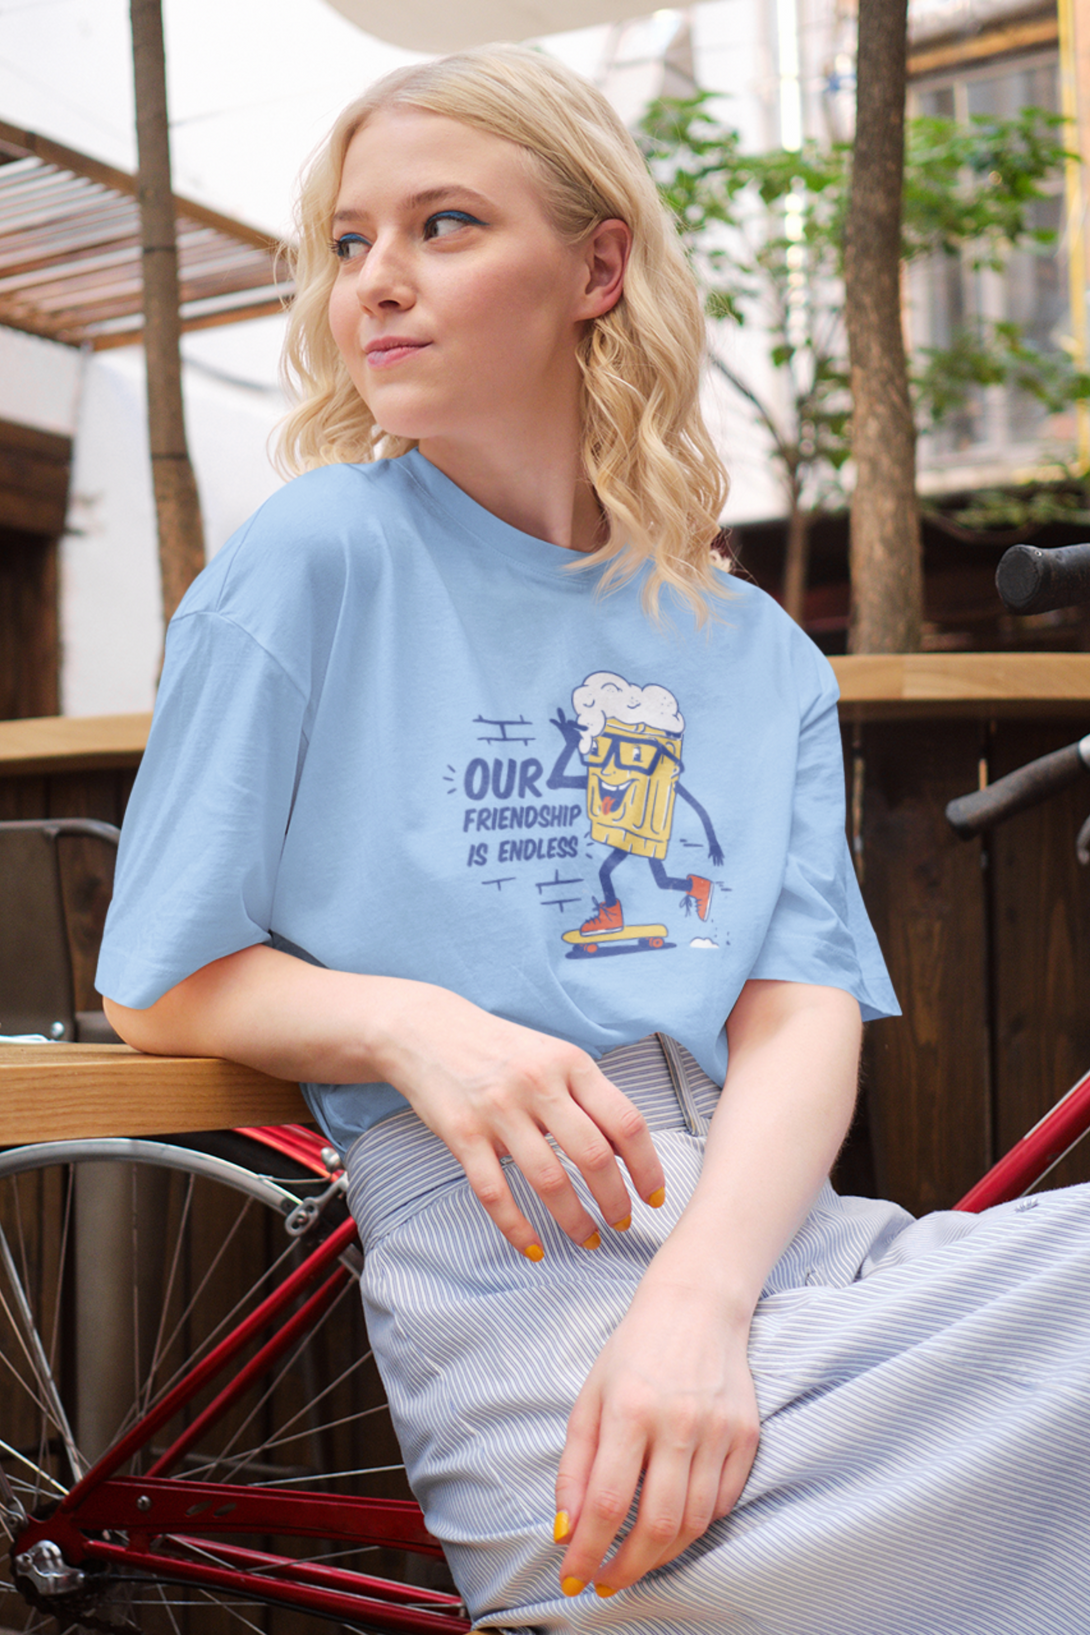 Our Friendship Is Endless Printed Oversized T-Shirt For Women - WowWaves - 7